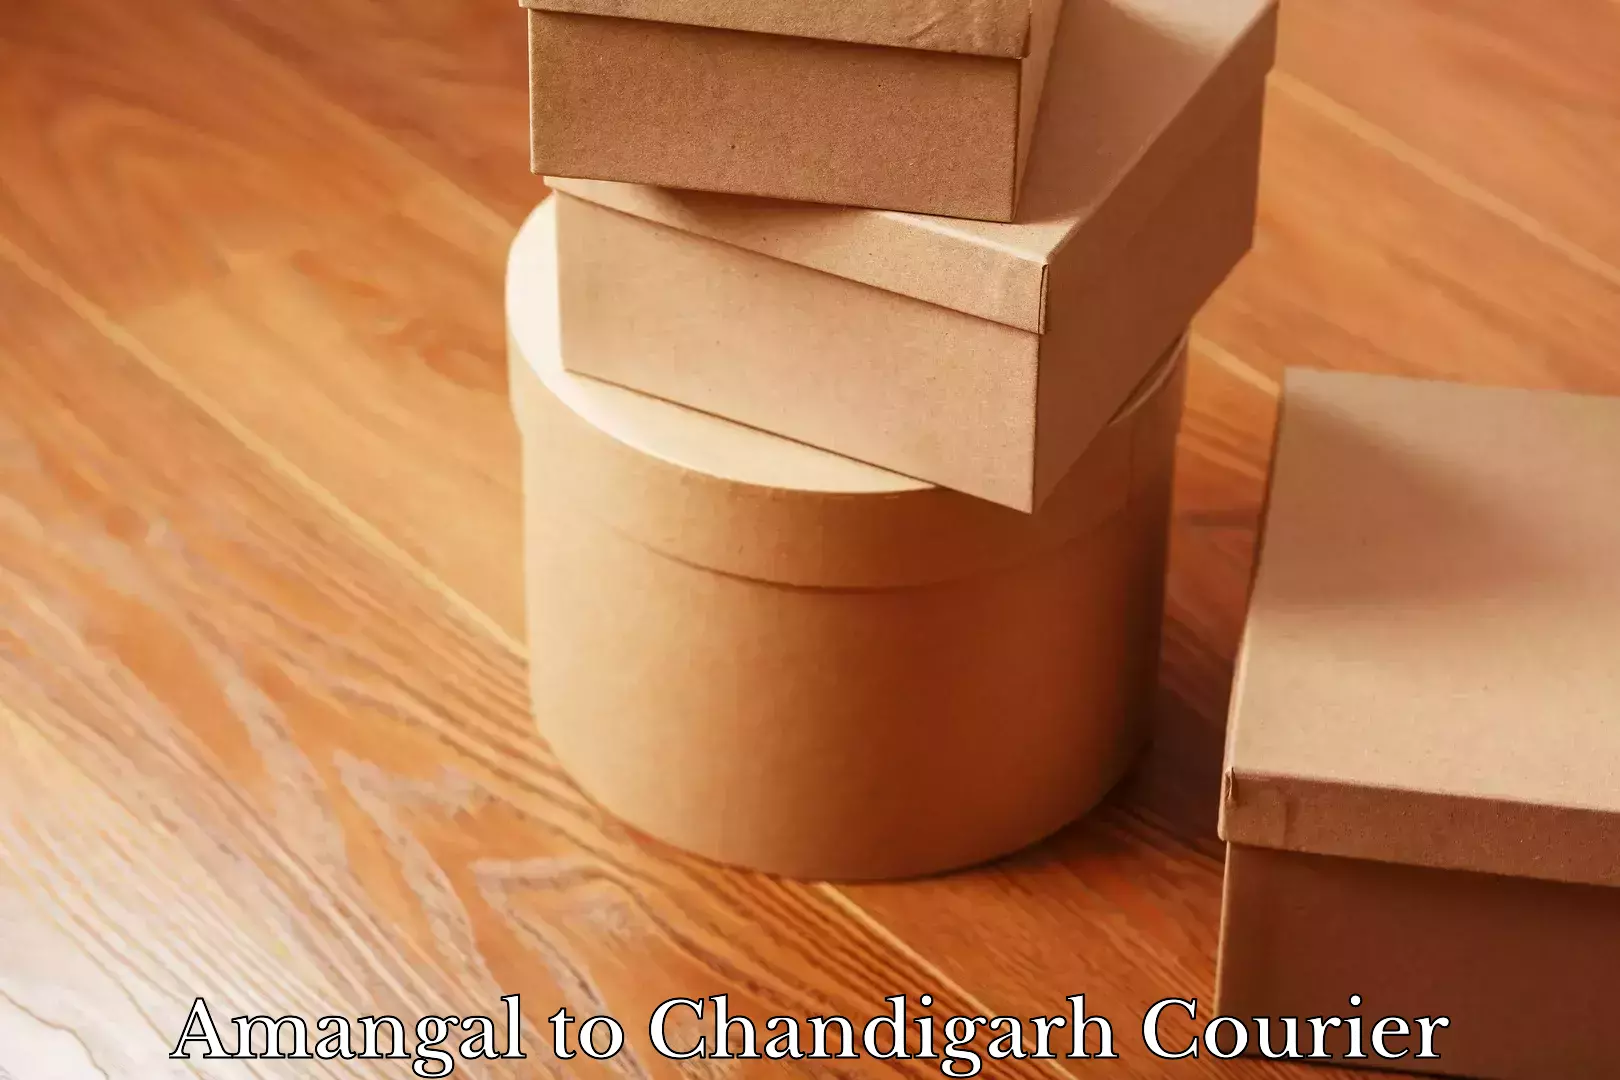 Air courier services in Amangal to Chandigarh